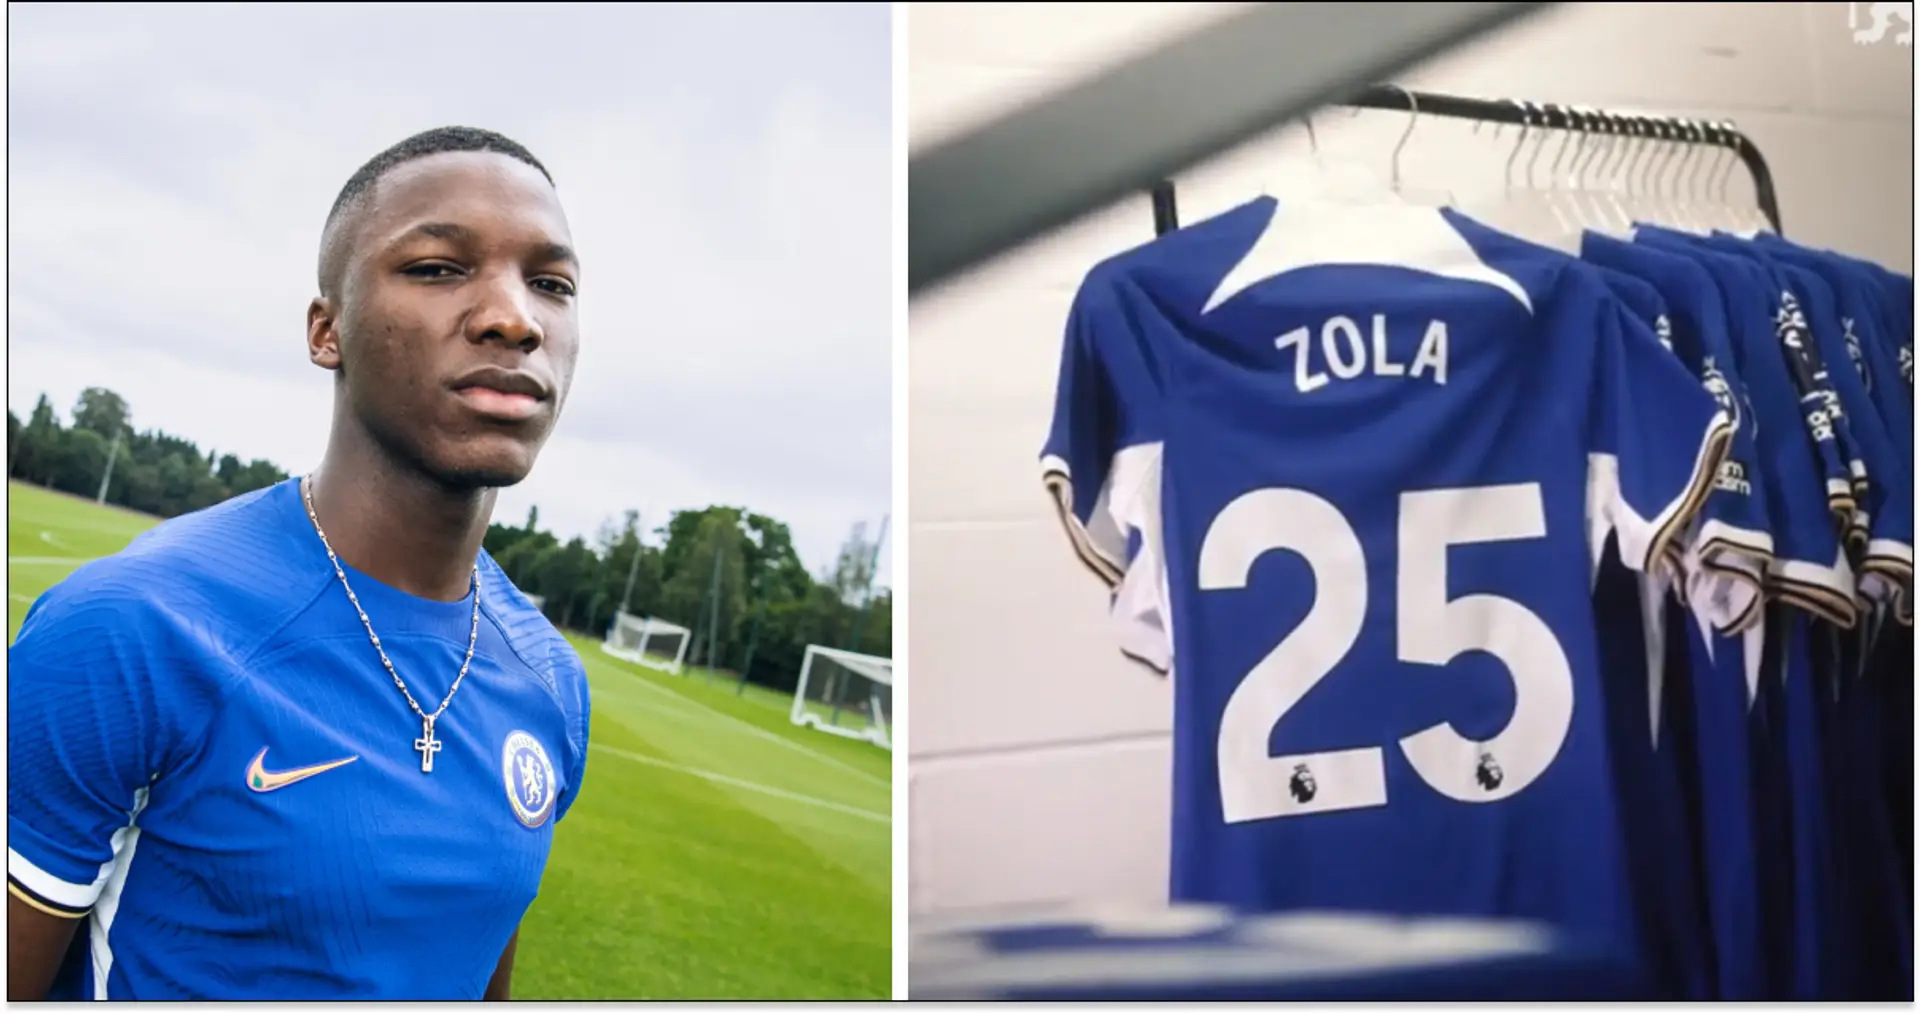 'He gives me his blessing': Zola gives Caicedo seal of approval to wear his retired number 25 at Chelsea